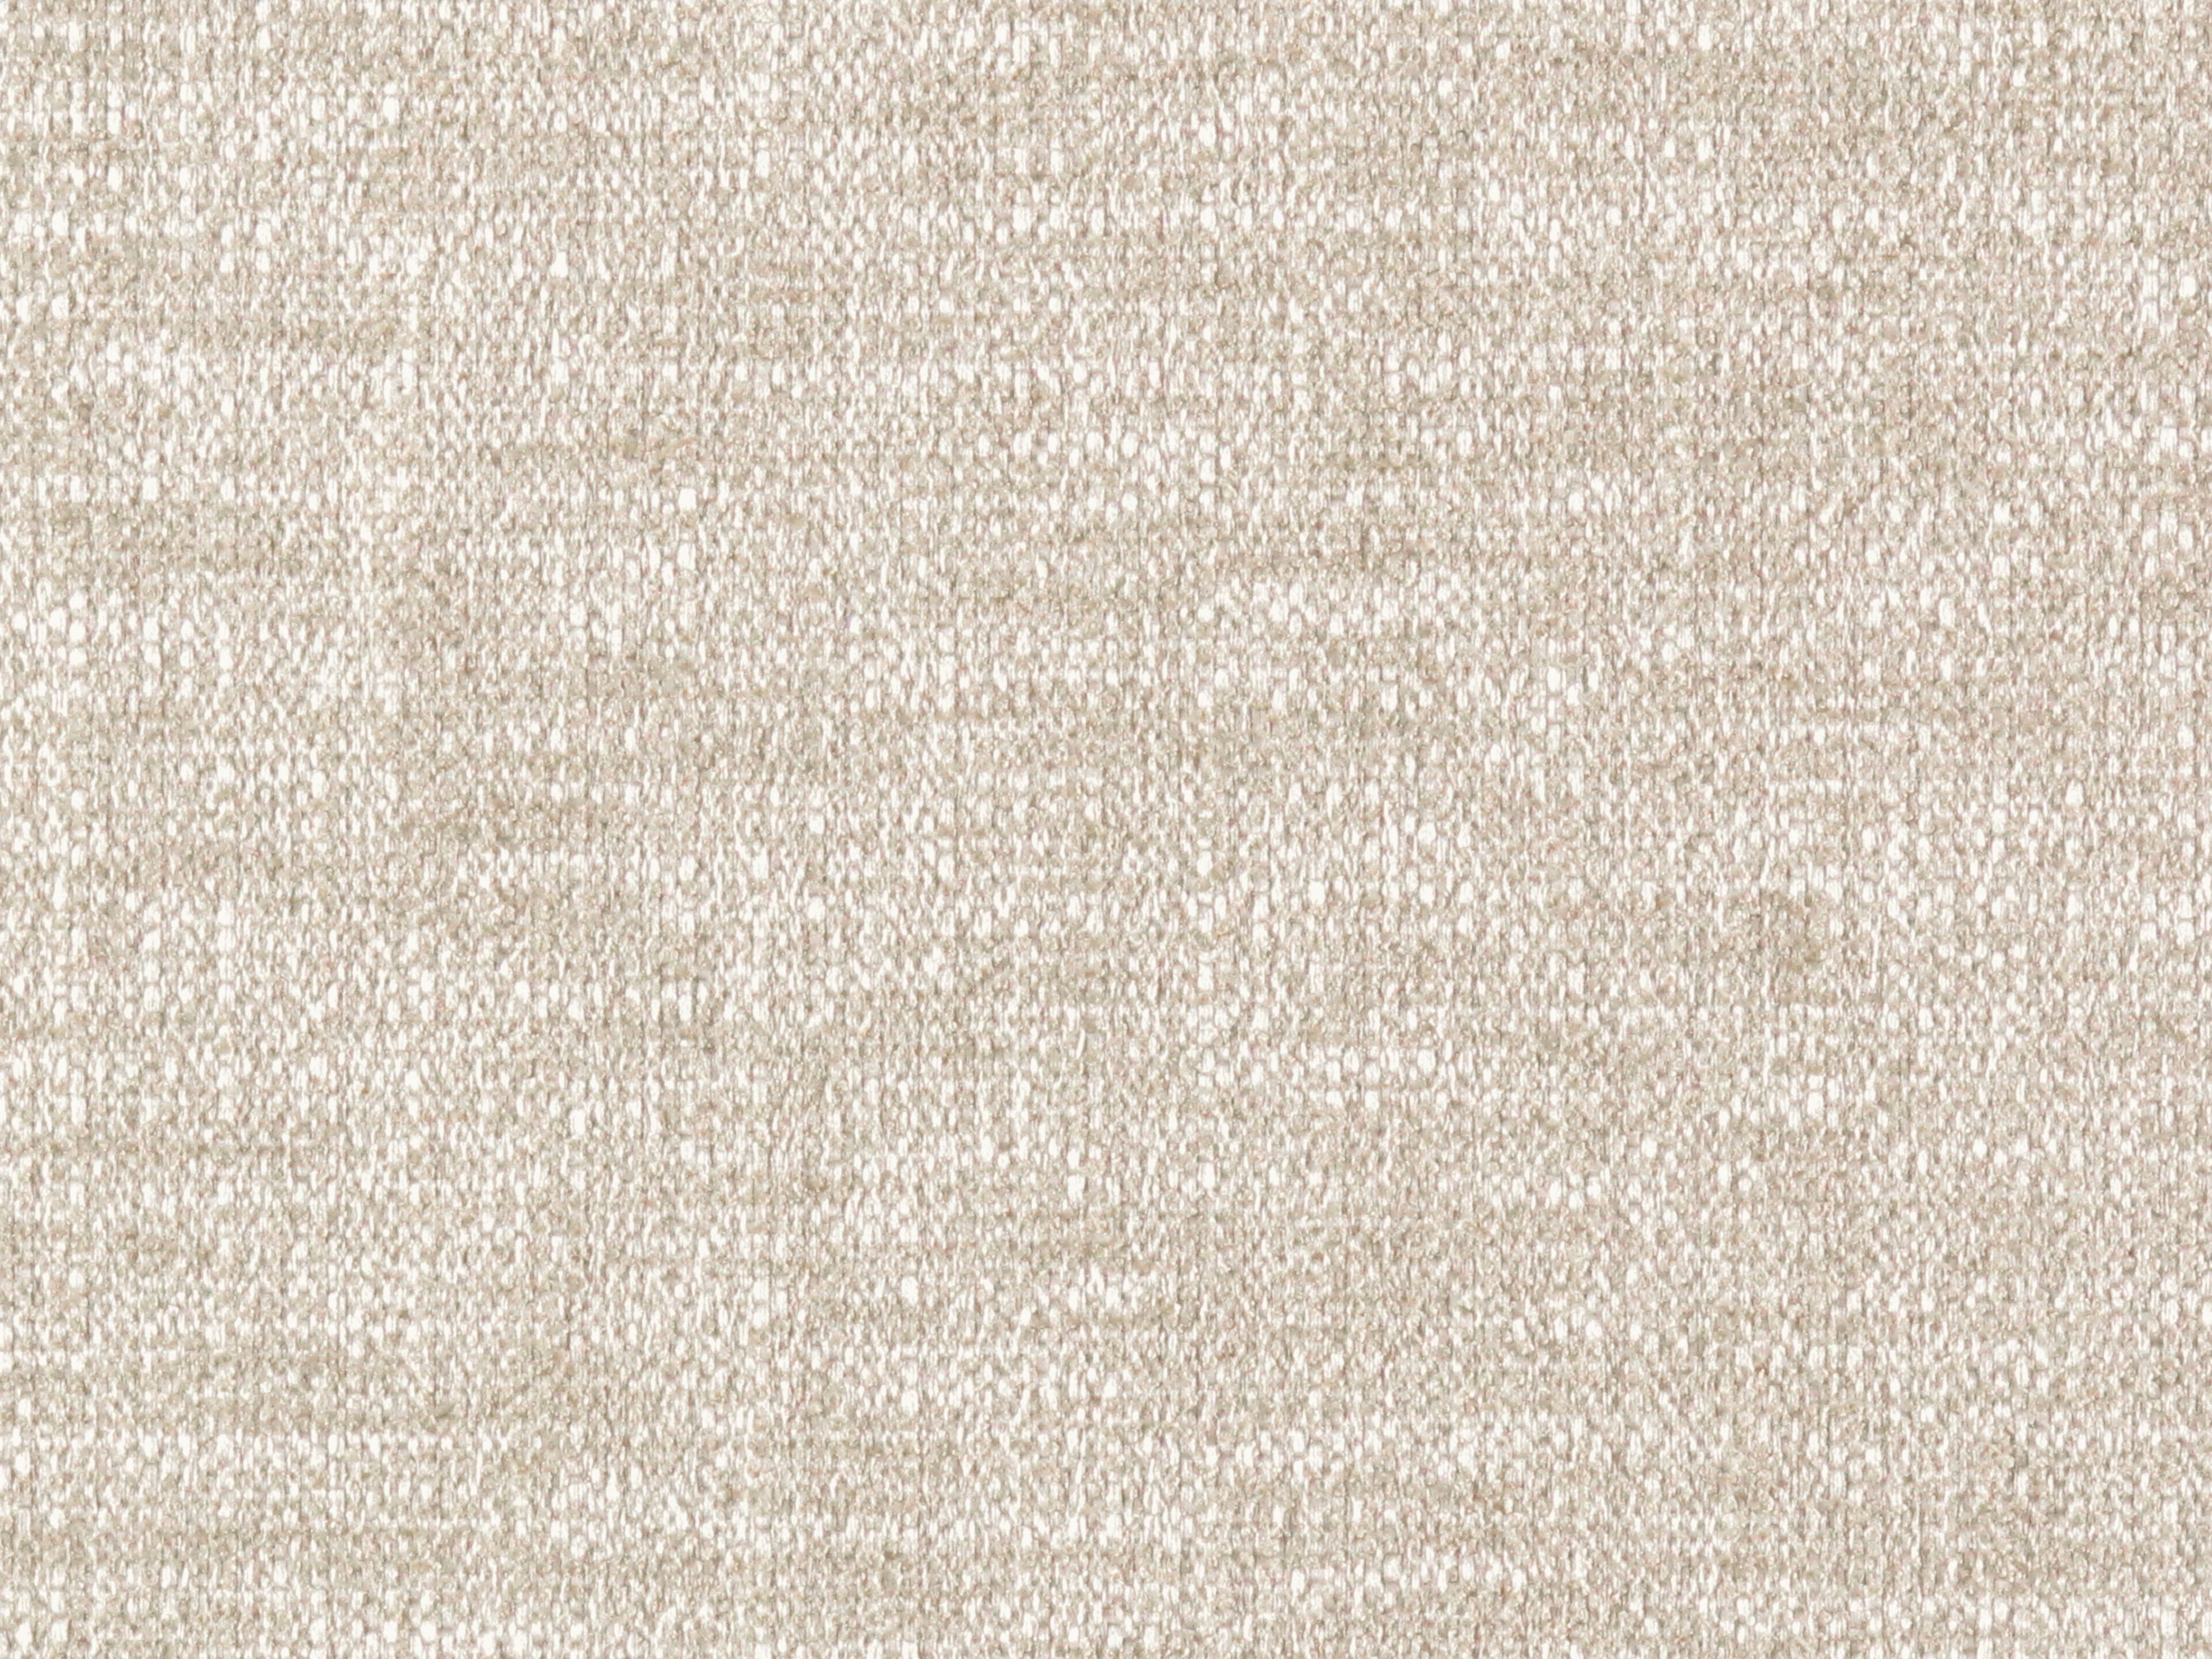 Rodanthe fabric in linen color - pattern number AL 0001RODA - by Scalamandre in the Old World Weavers collection